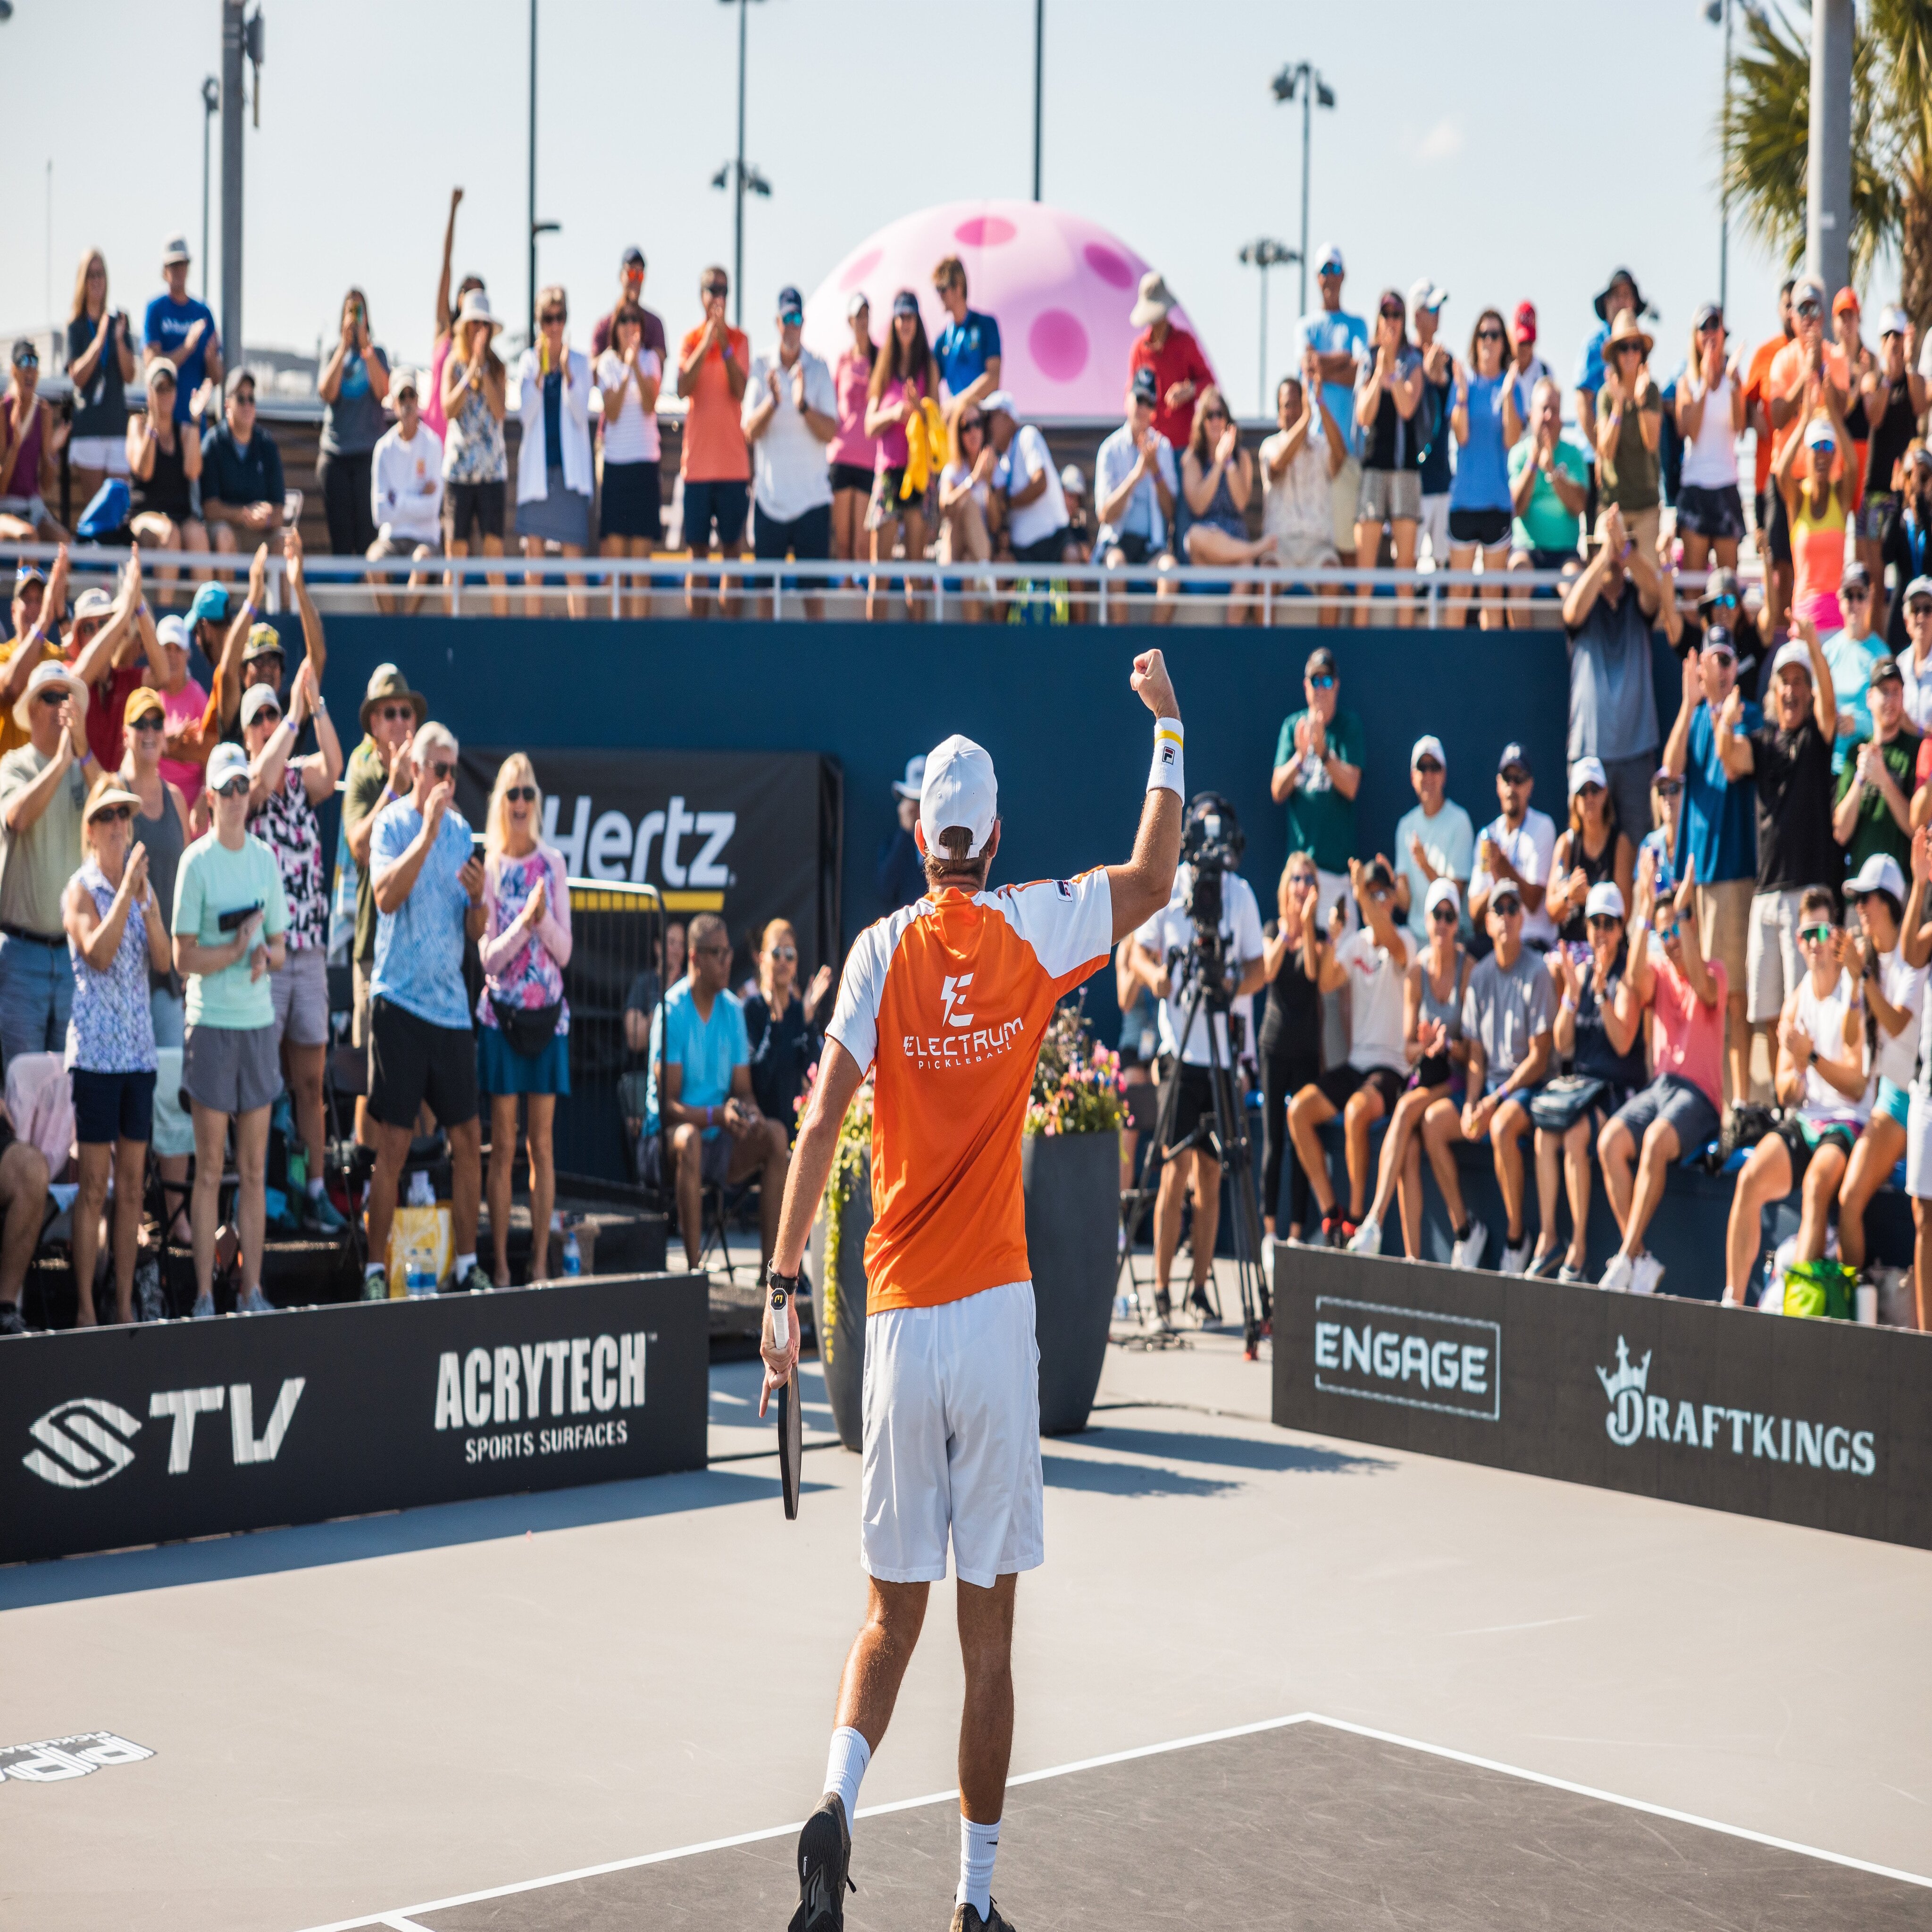 San Diego Open Prize Money 2023 [Confirmed] - Perfect Tennis